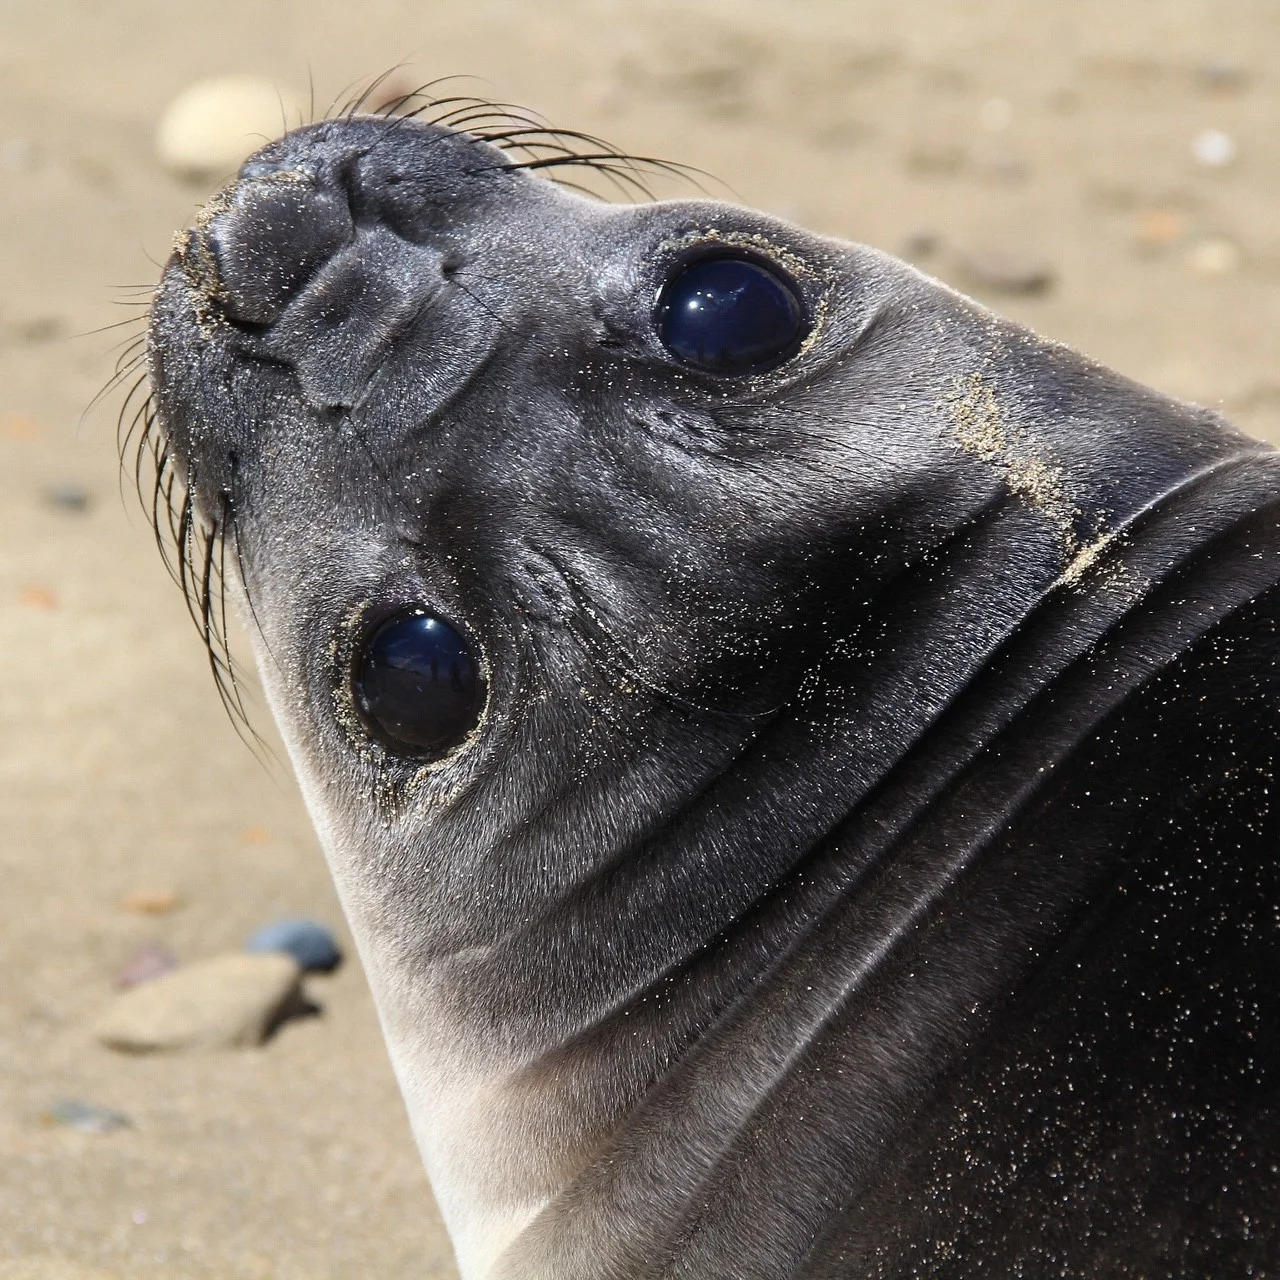 Healthy young elephant seal with its head raised stares back at camera in close-up